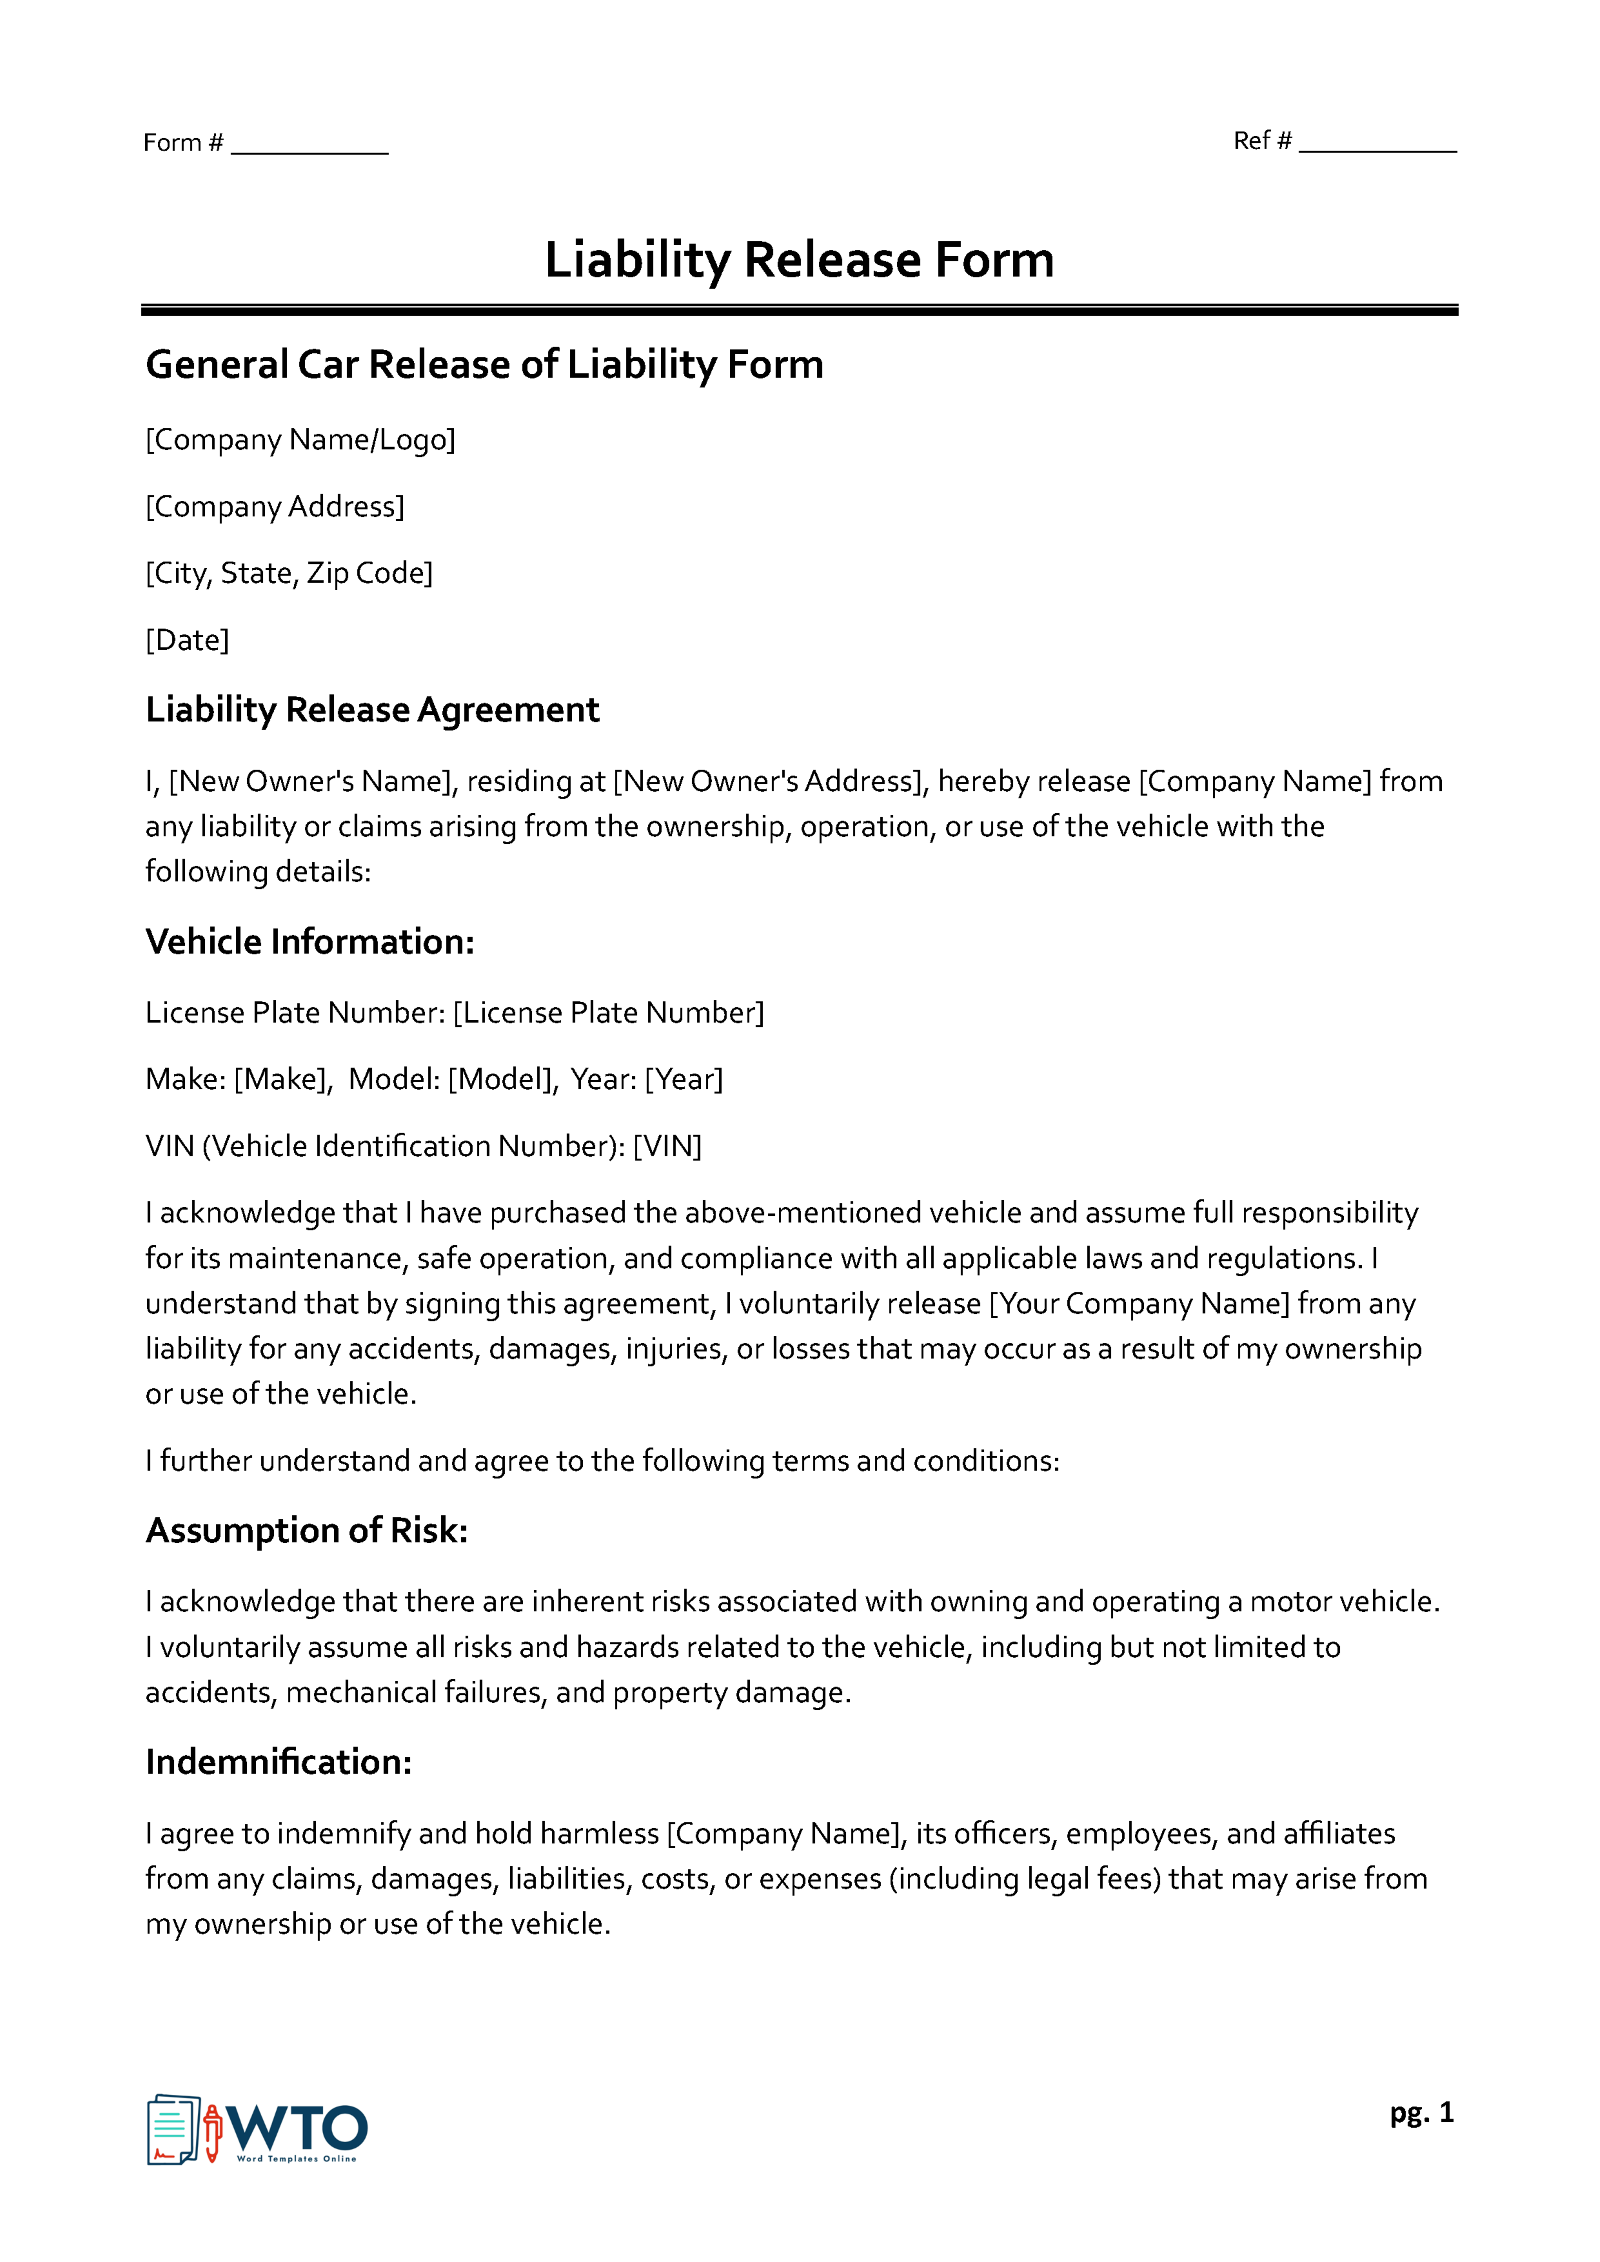 Example of Liability Release Form